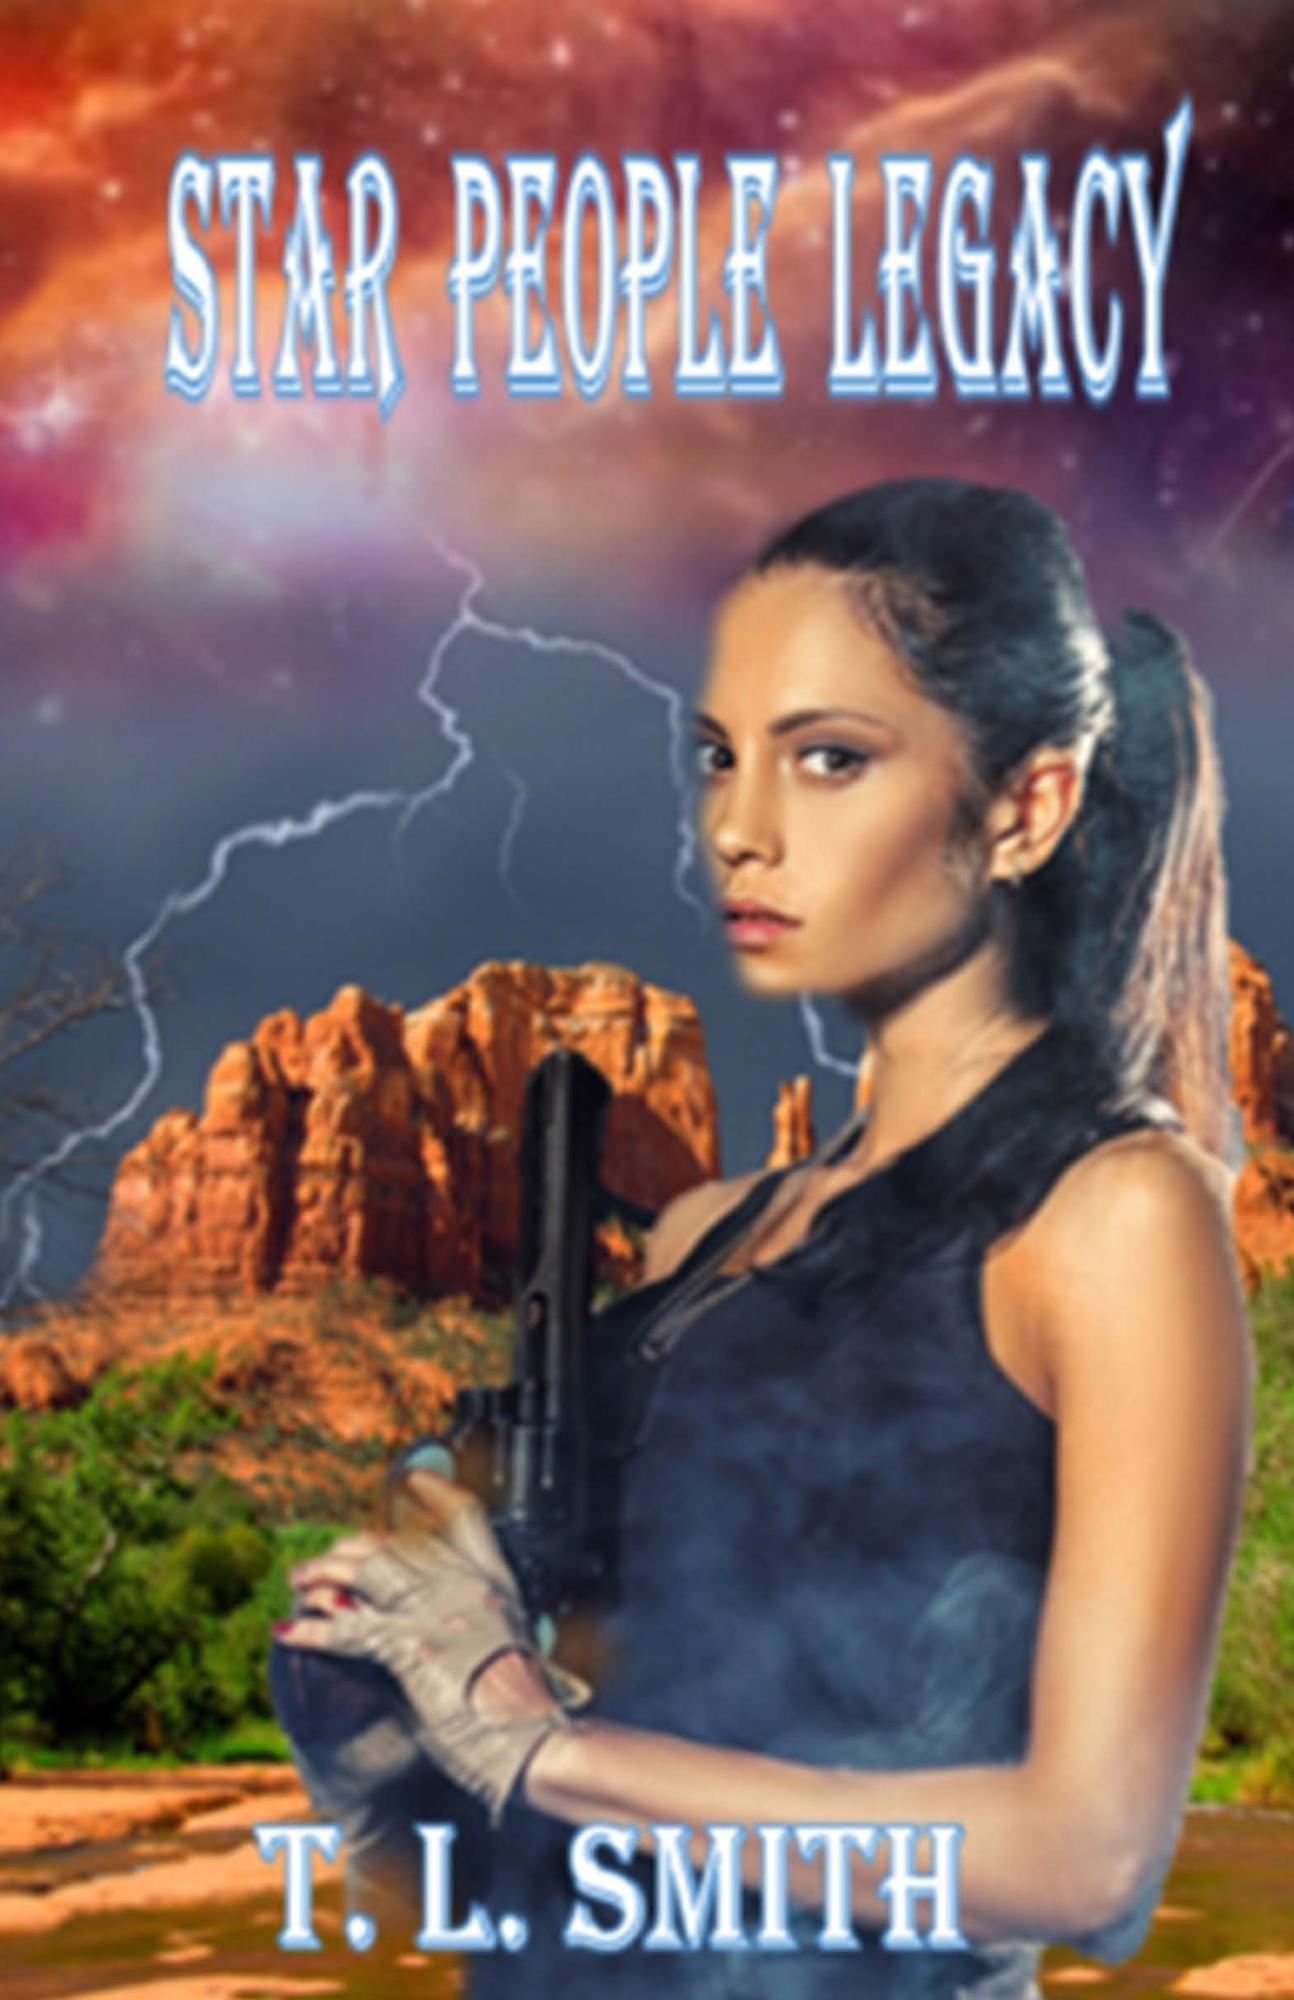 Star_People_Legacy_Cover_for_Kindle